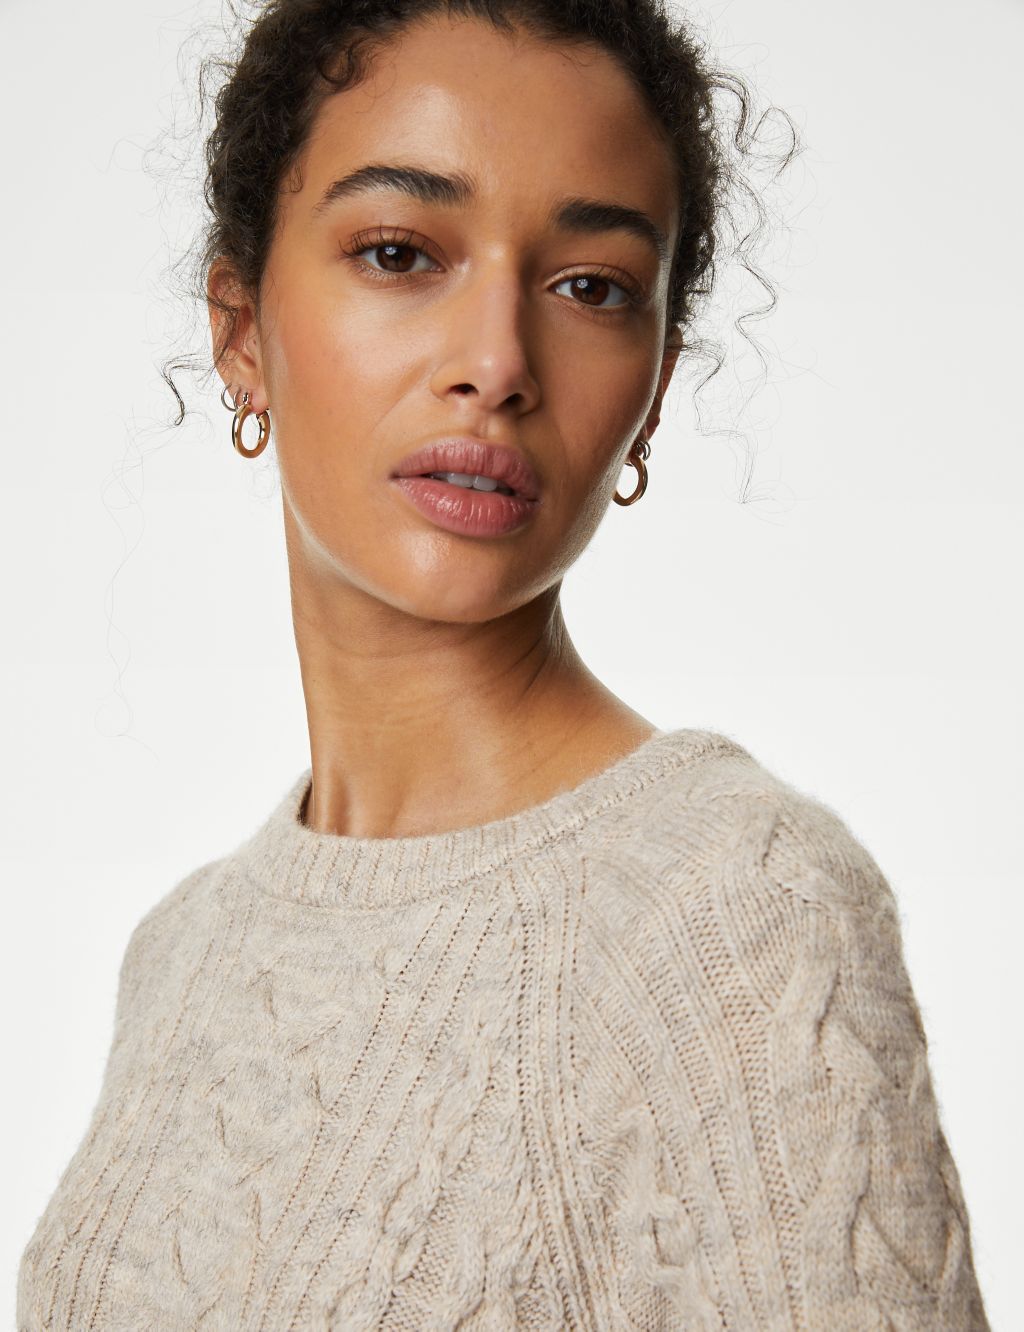 Cable Knit Crew Neck Midi Knitted Dress image 3